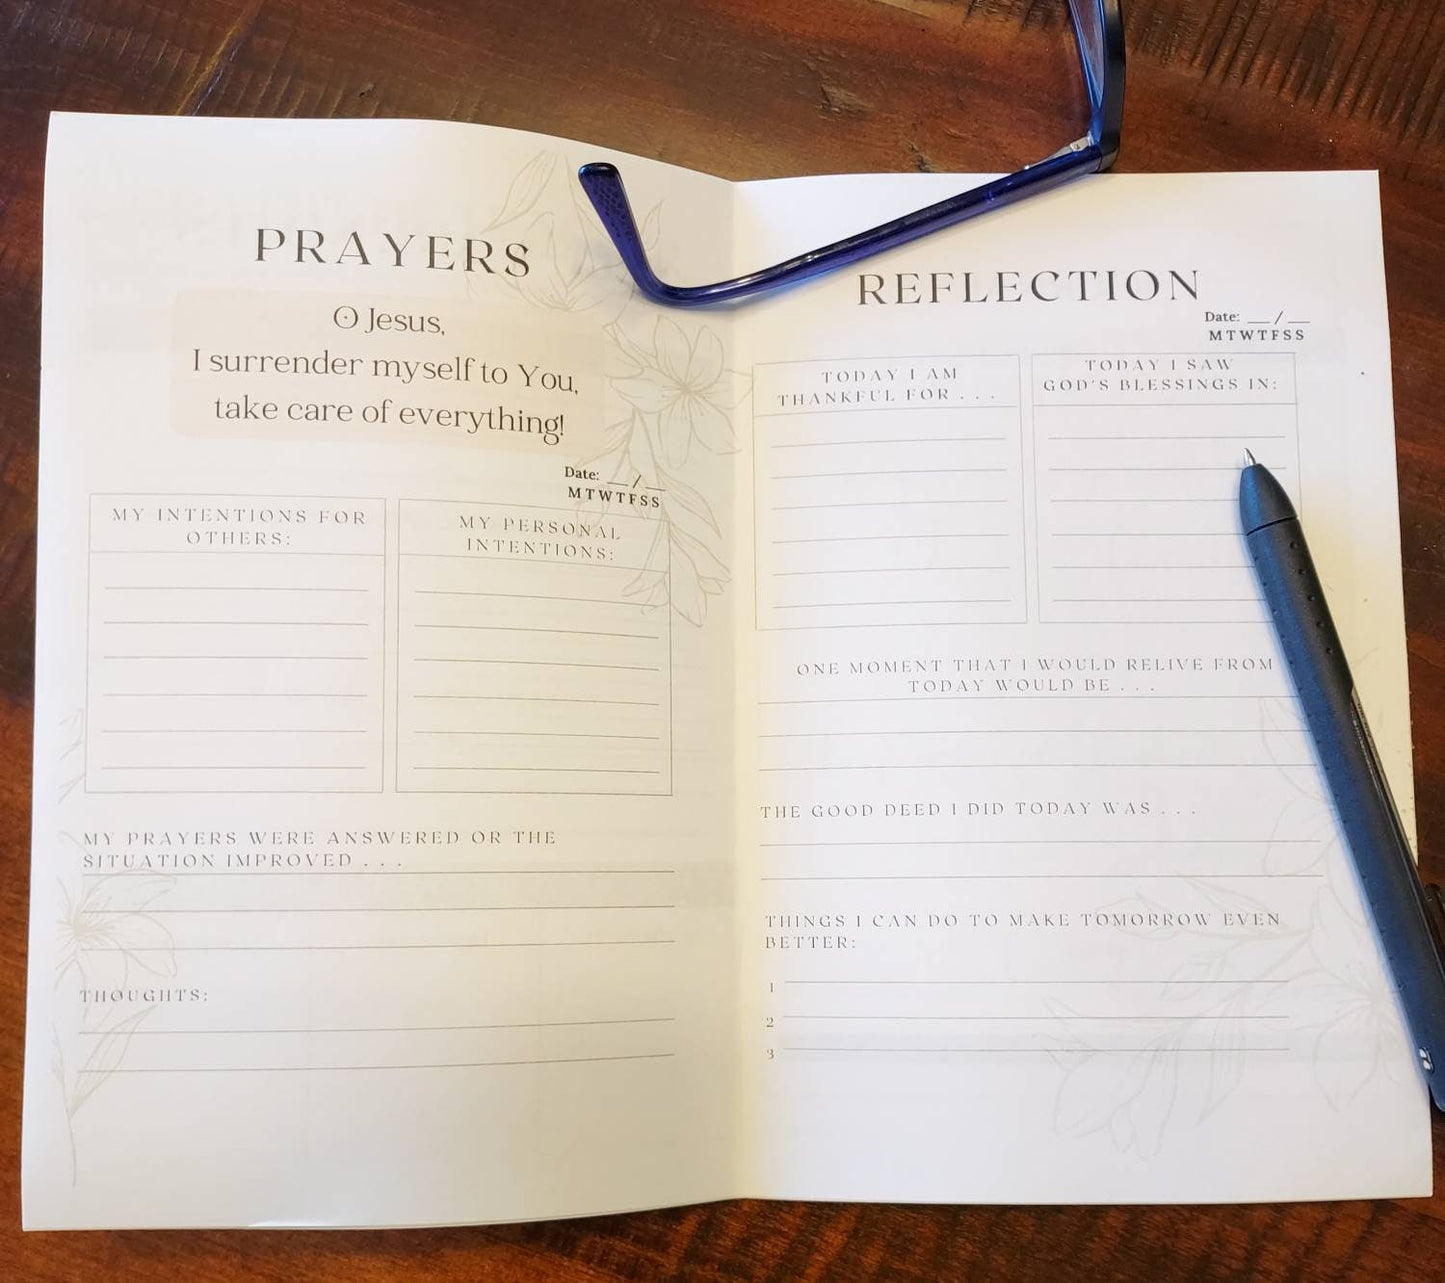 Catholic Prayer and Gratitude Journal with Writing Prompt 10 page Printable Booklet